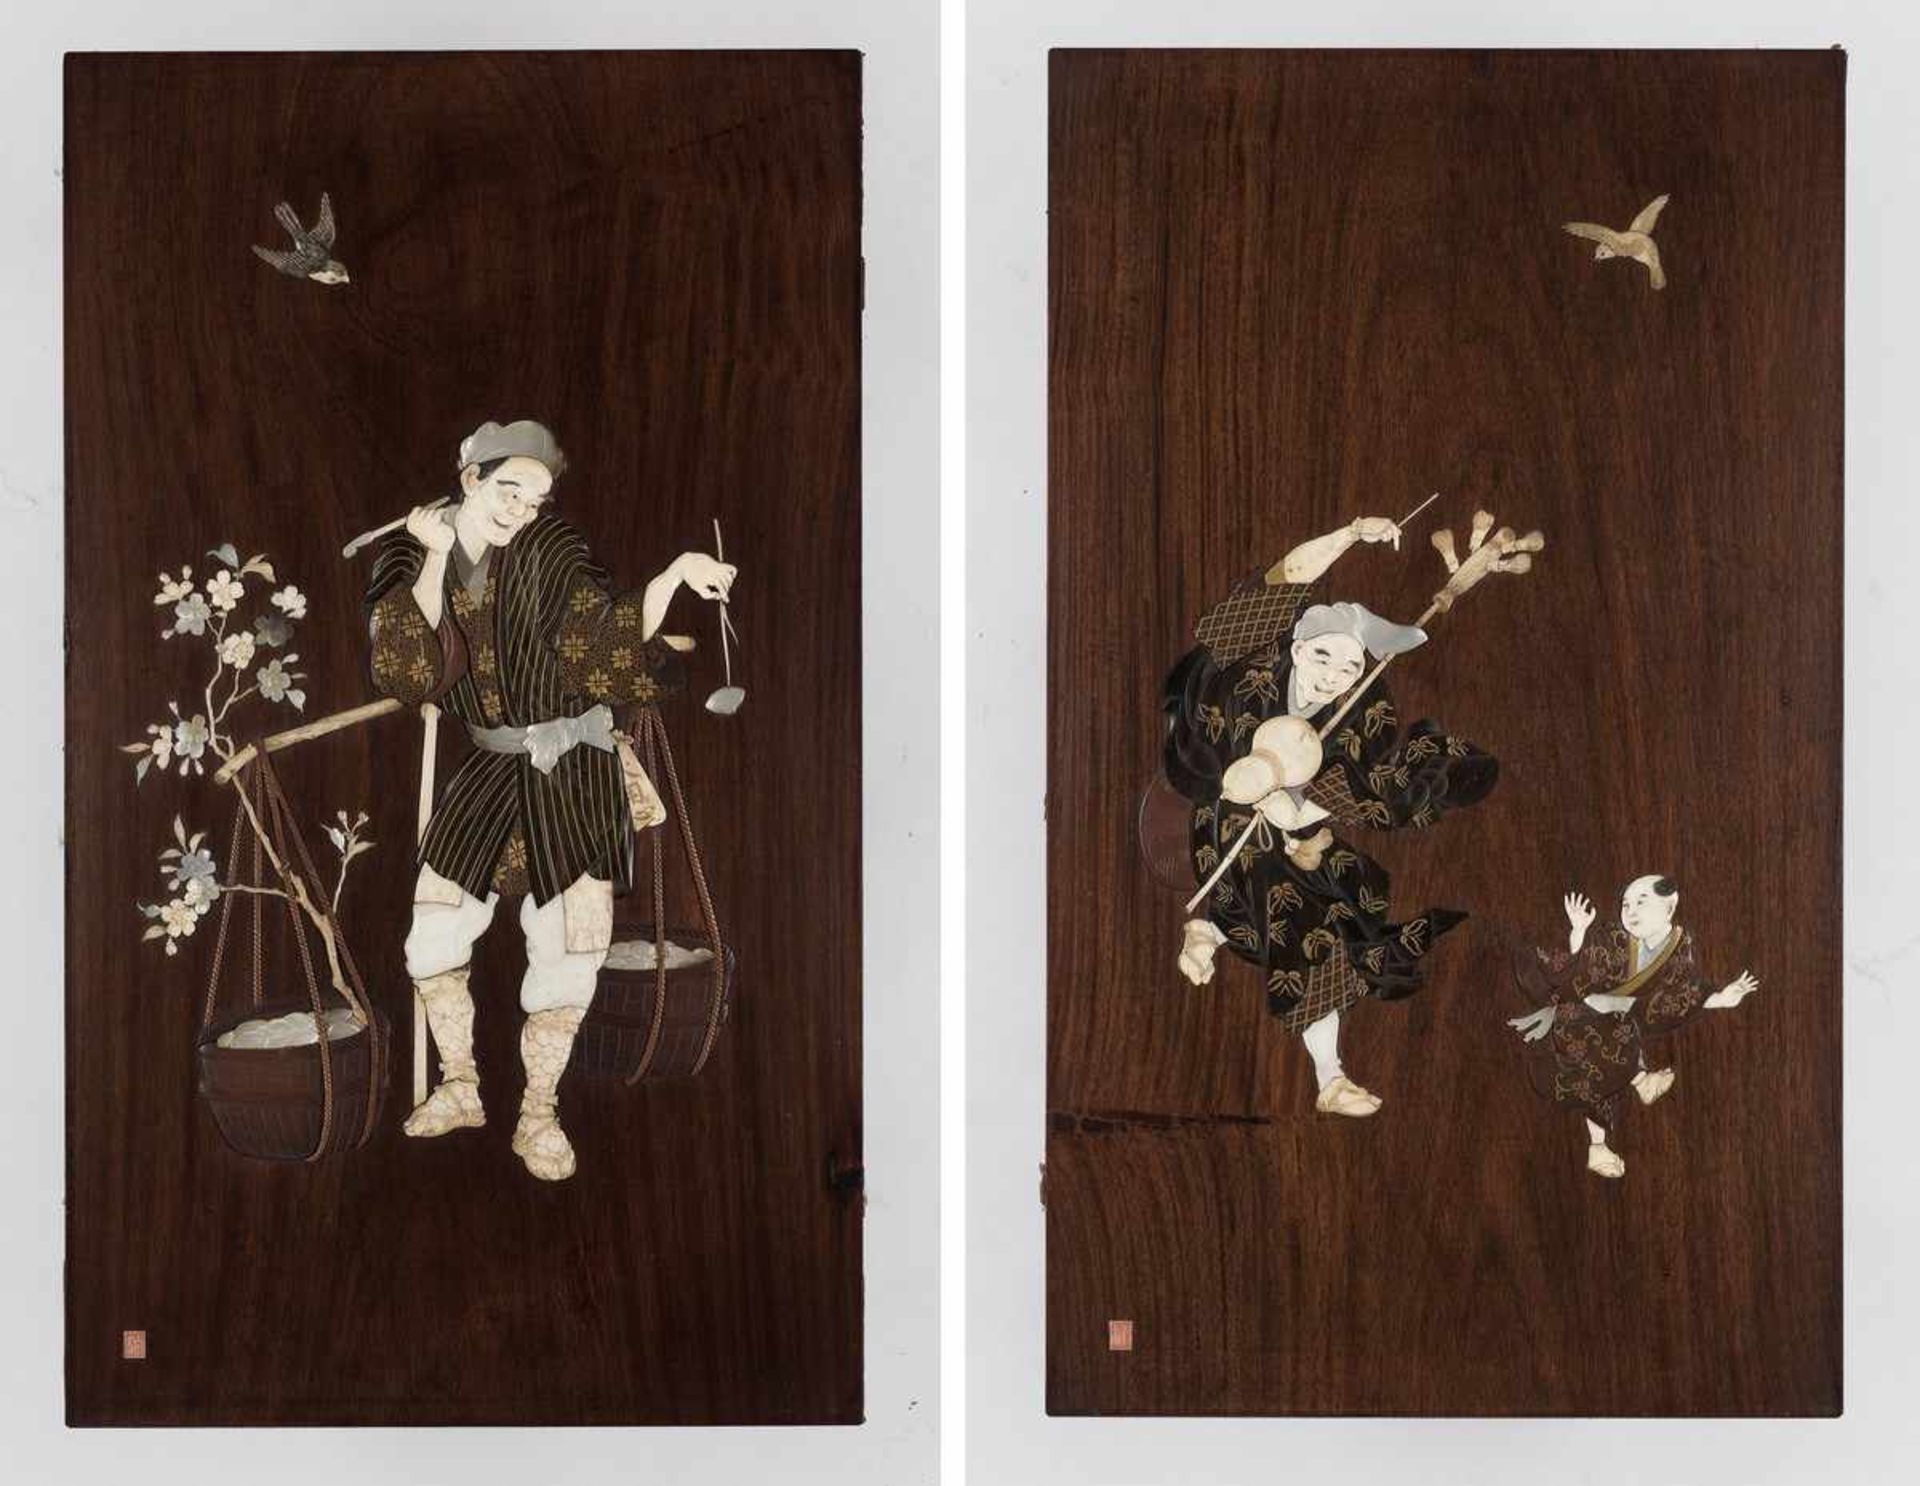 A PAIR OF LARGE SHIBAYAMA-INLAID WOOD PANELS OF STREET VENDORS Japan, Meiji period (1868-1912)Finely